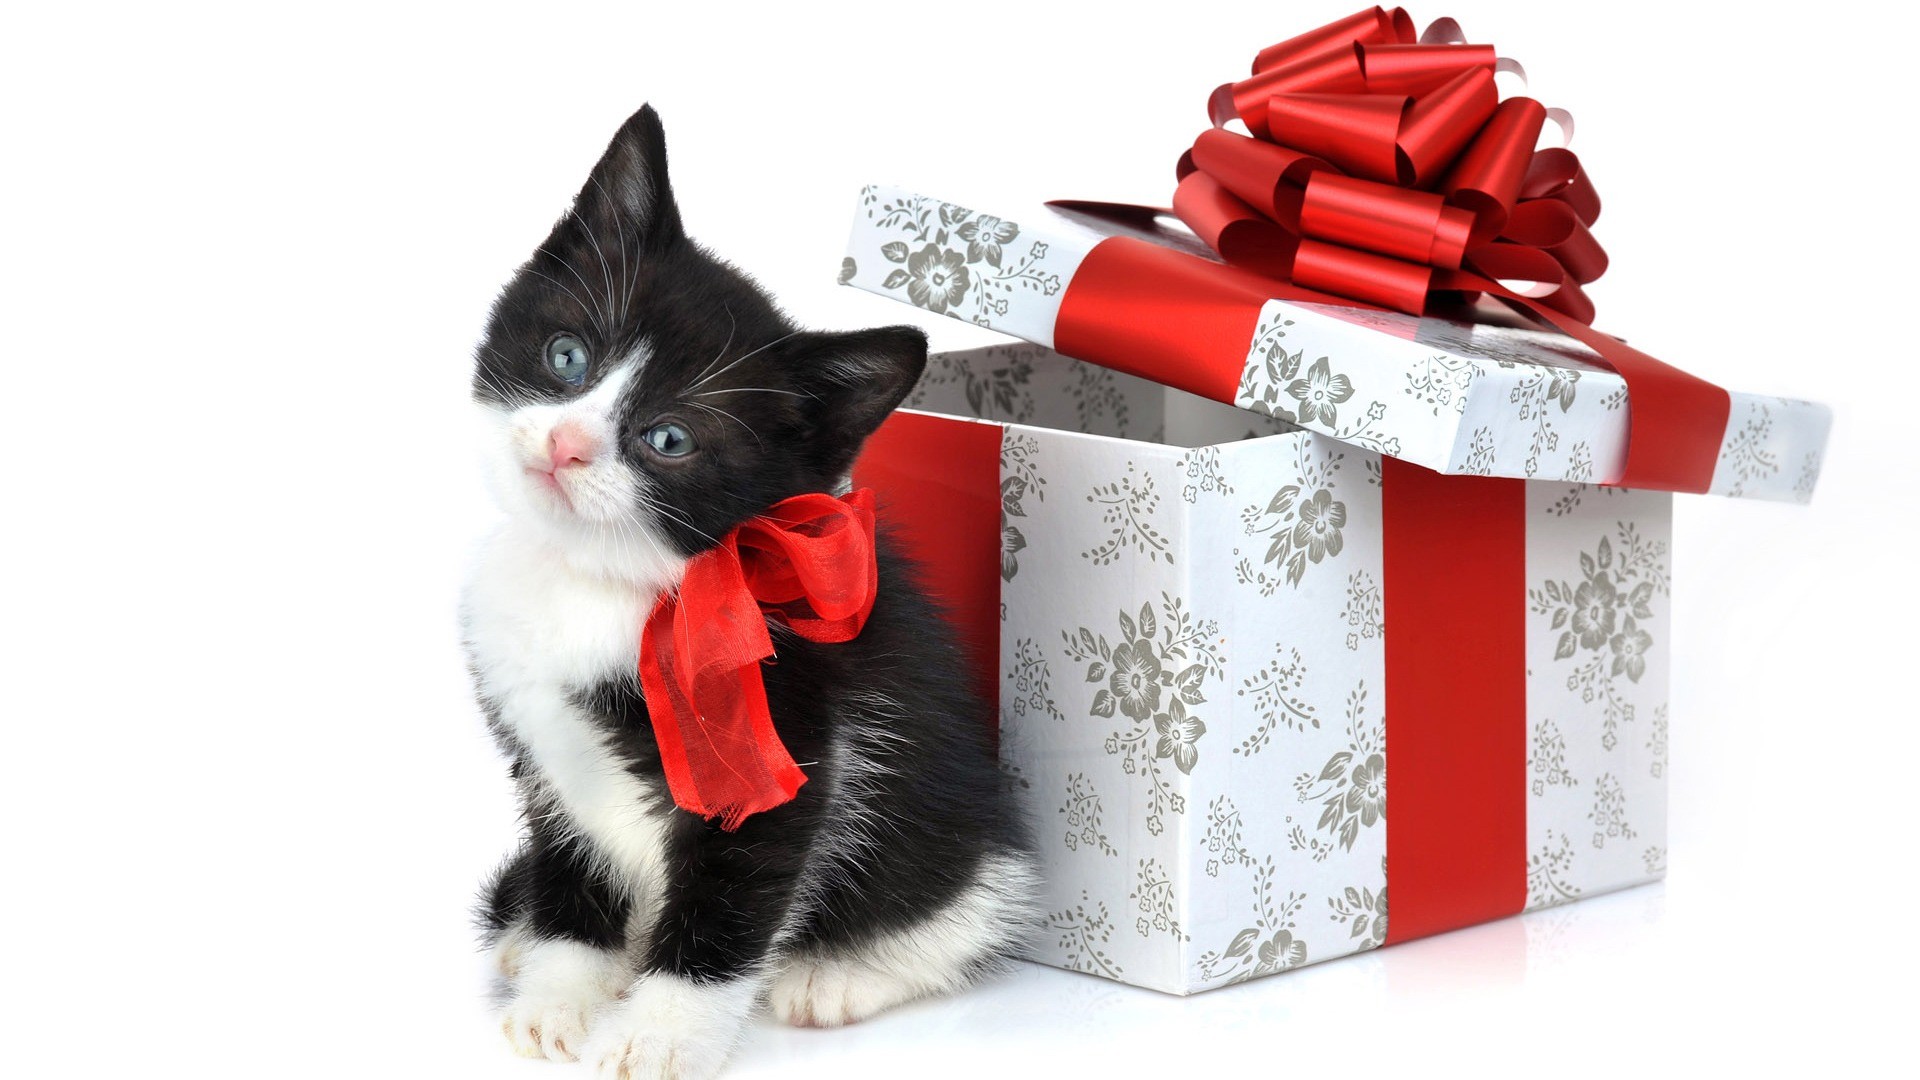 1920x1080 Cute cat and gift wallpaper